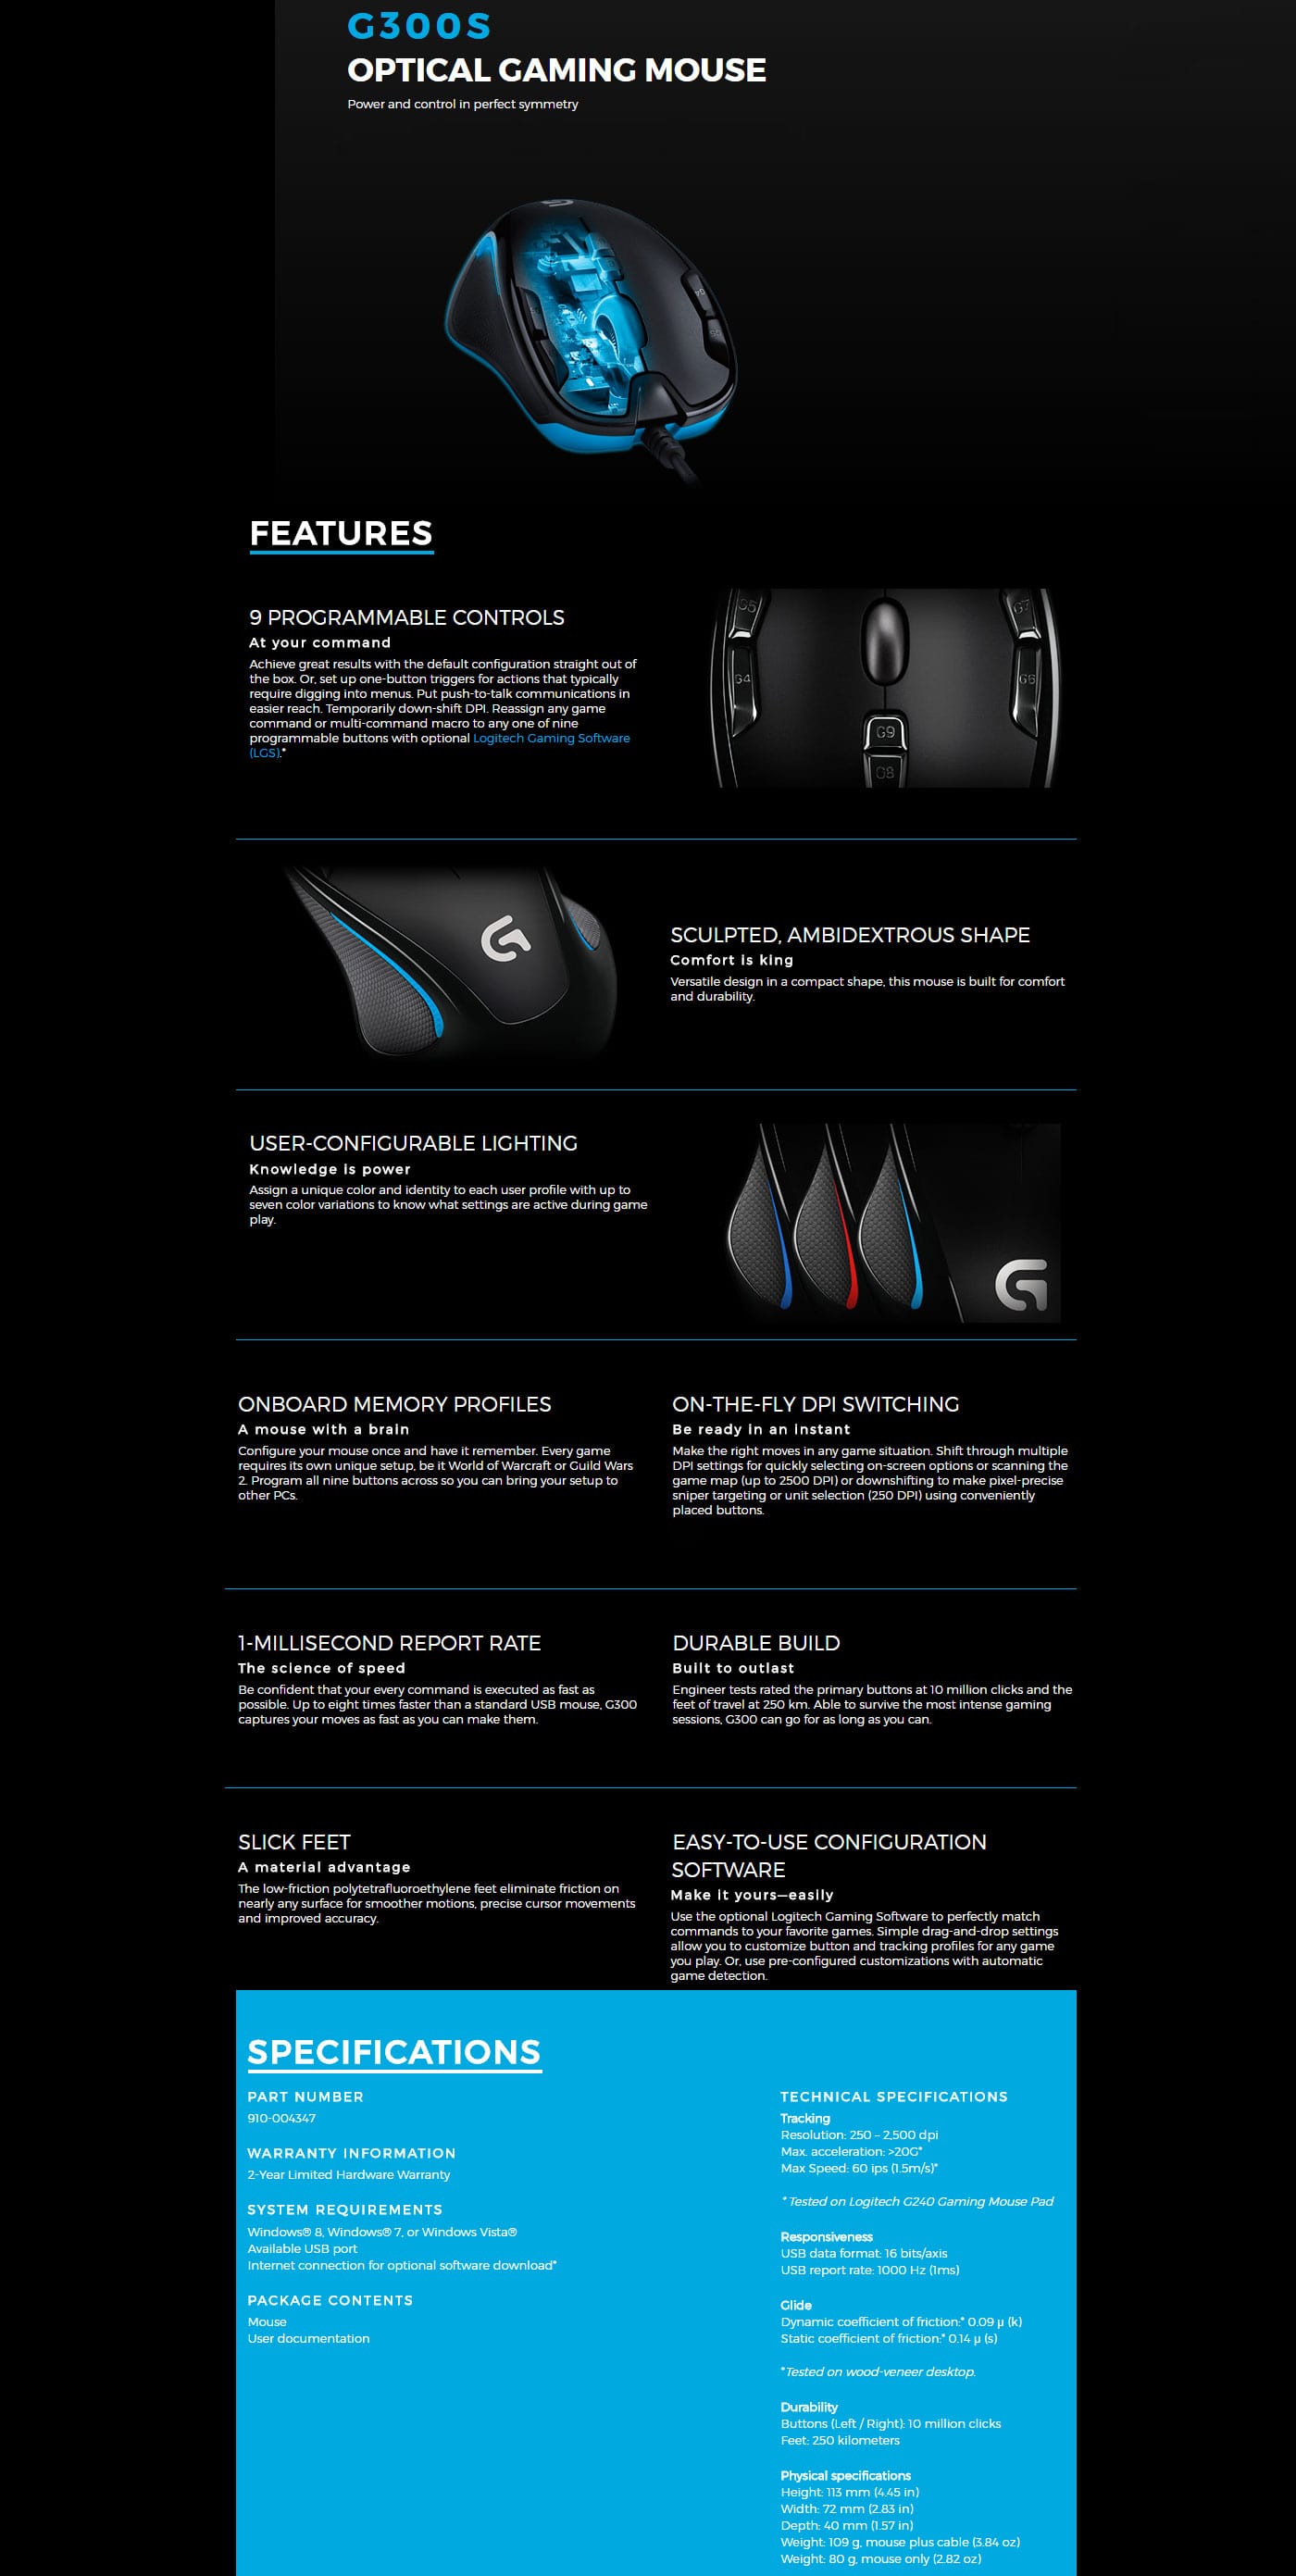 Logitech G300S Optical Gaming Mouse features